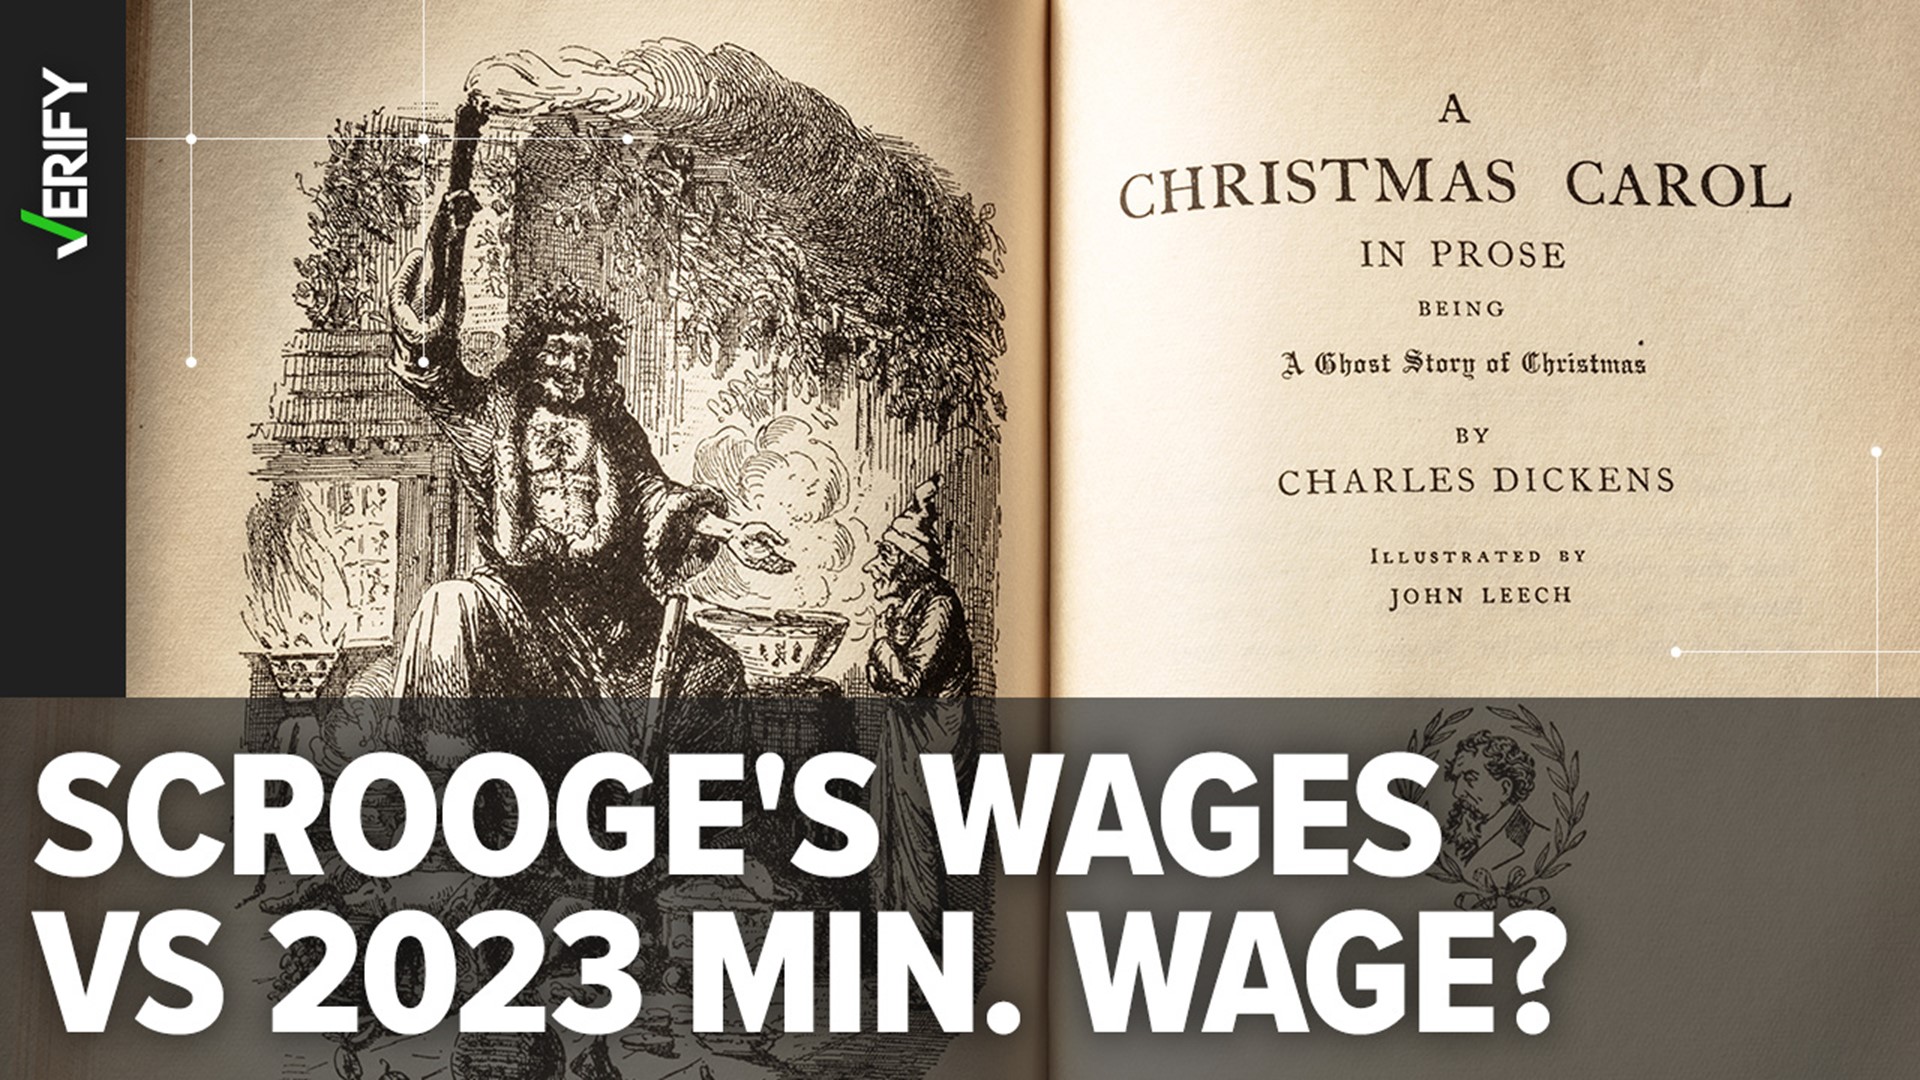 Bob Cratchit, Ebenezer Scrooge’s underpaid and overworked employee in Charles Dickens’ A Christmas Carol, made 15 shillings a week. Here’s how much that is today.